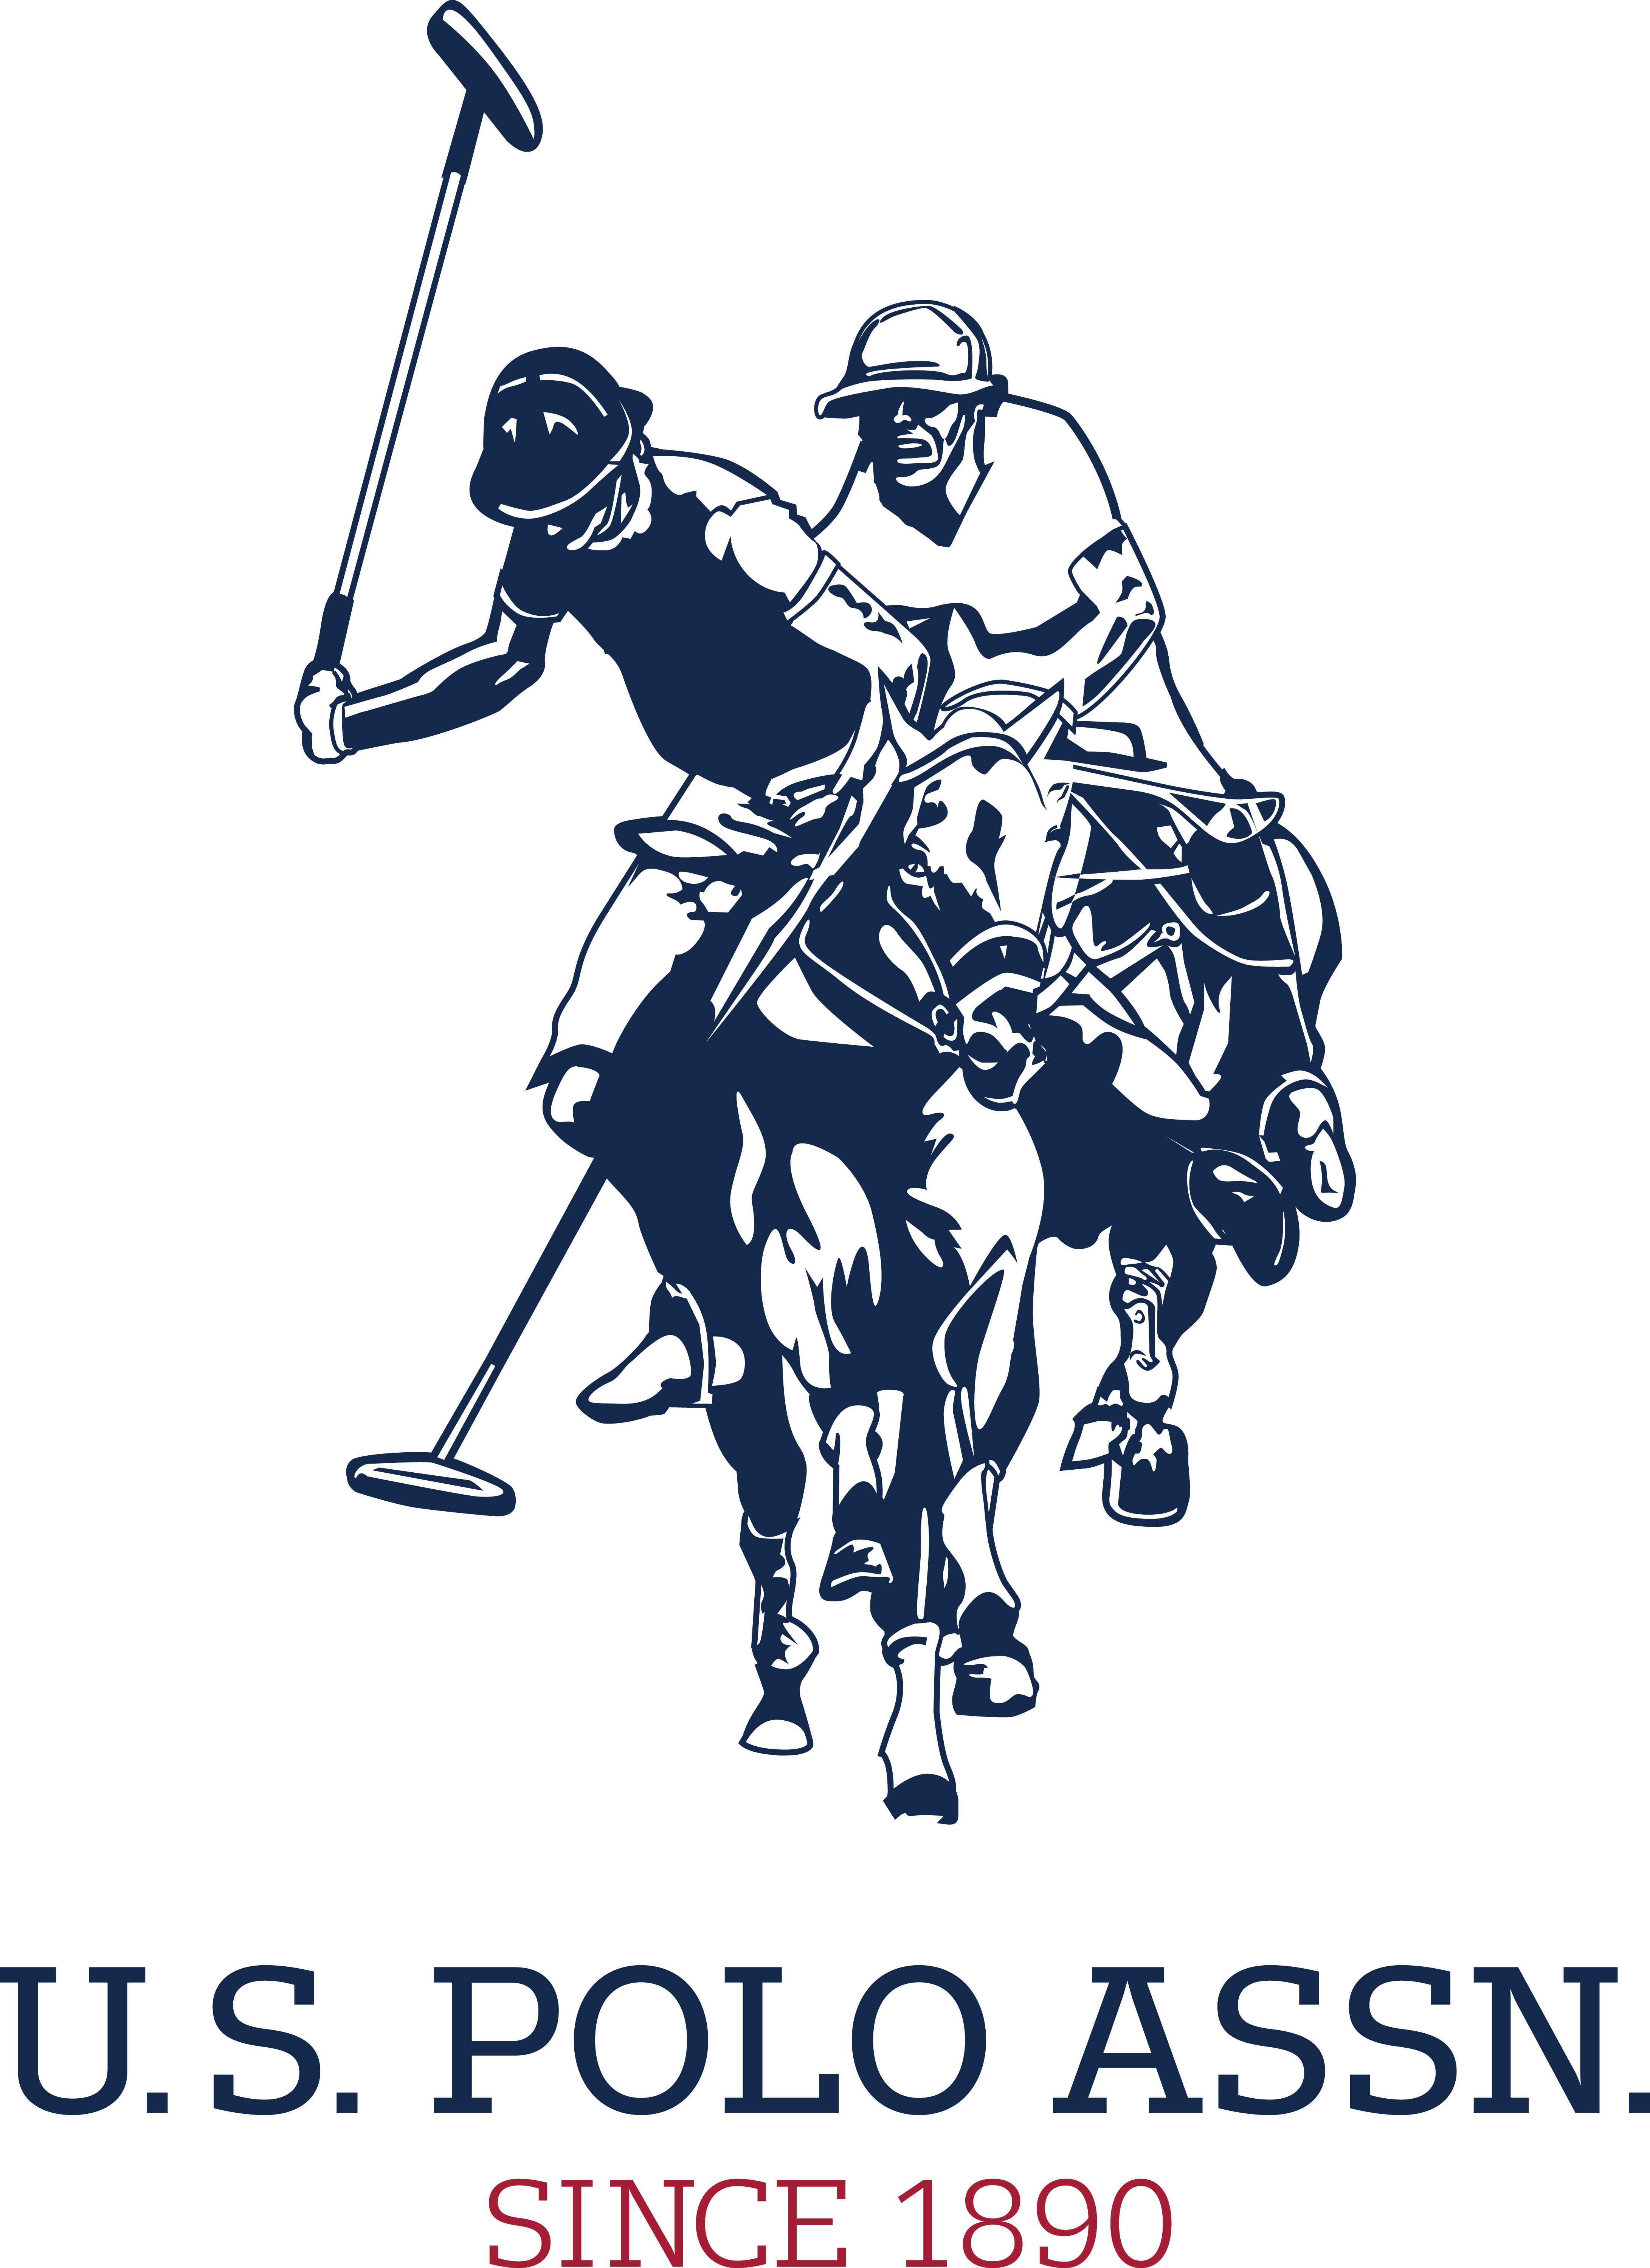 For the Fifth Year, U.S. Polo Assn. Partners with the 2023 Outsourcing Inc. Royal Charity Cup, Hosted by His Royal Highness, The Prince of Wales